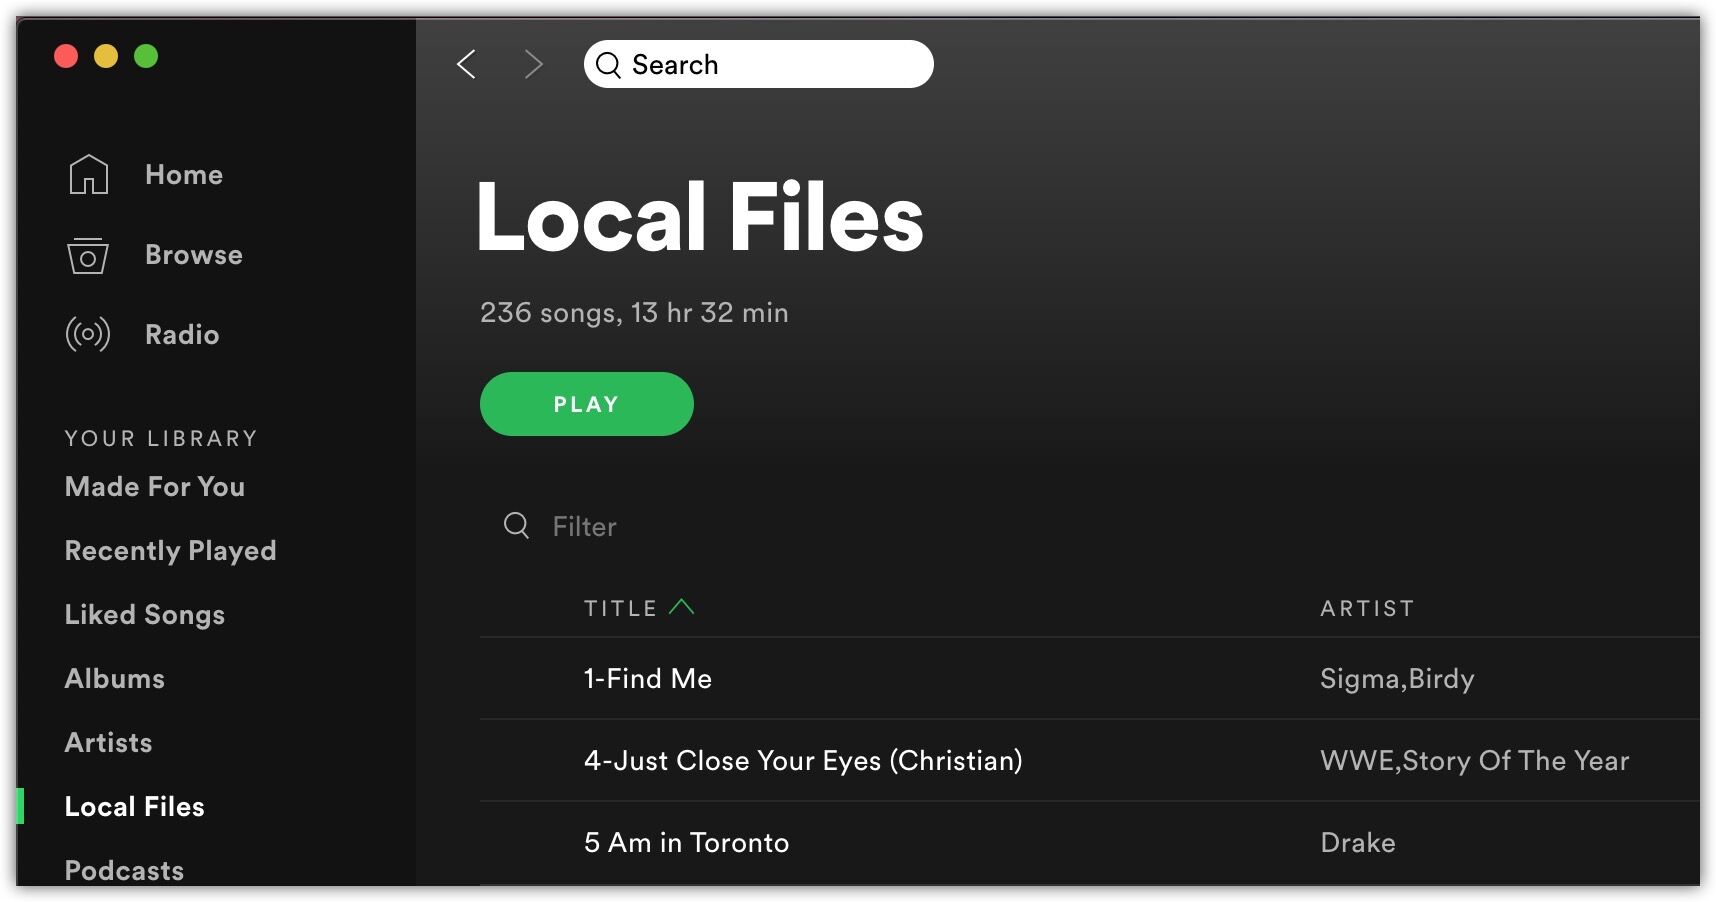 Add Local Files to Spotify Successfully